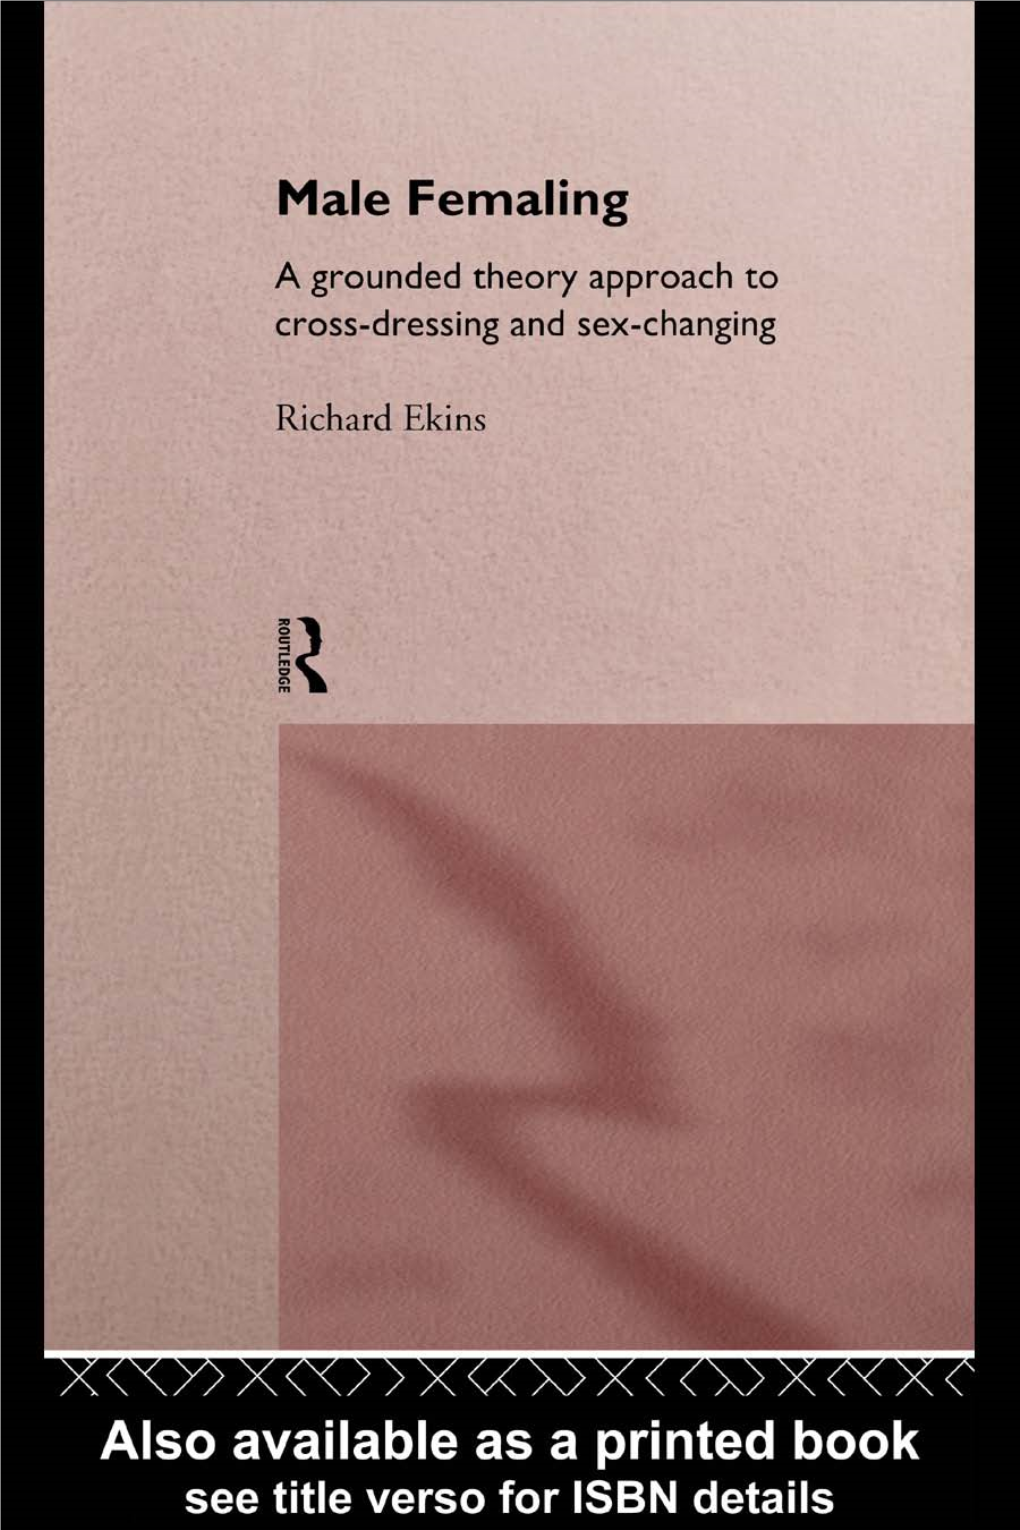 Male Femaling: a Grounded Theory Approach to Cross-Dressing and Sex-Changing/Richard Ekins; Foreword by Anselm Strauss P